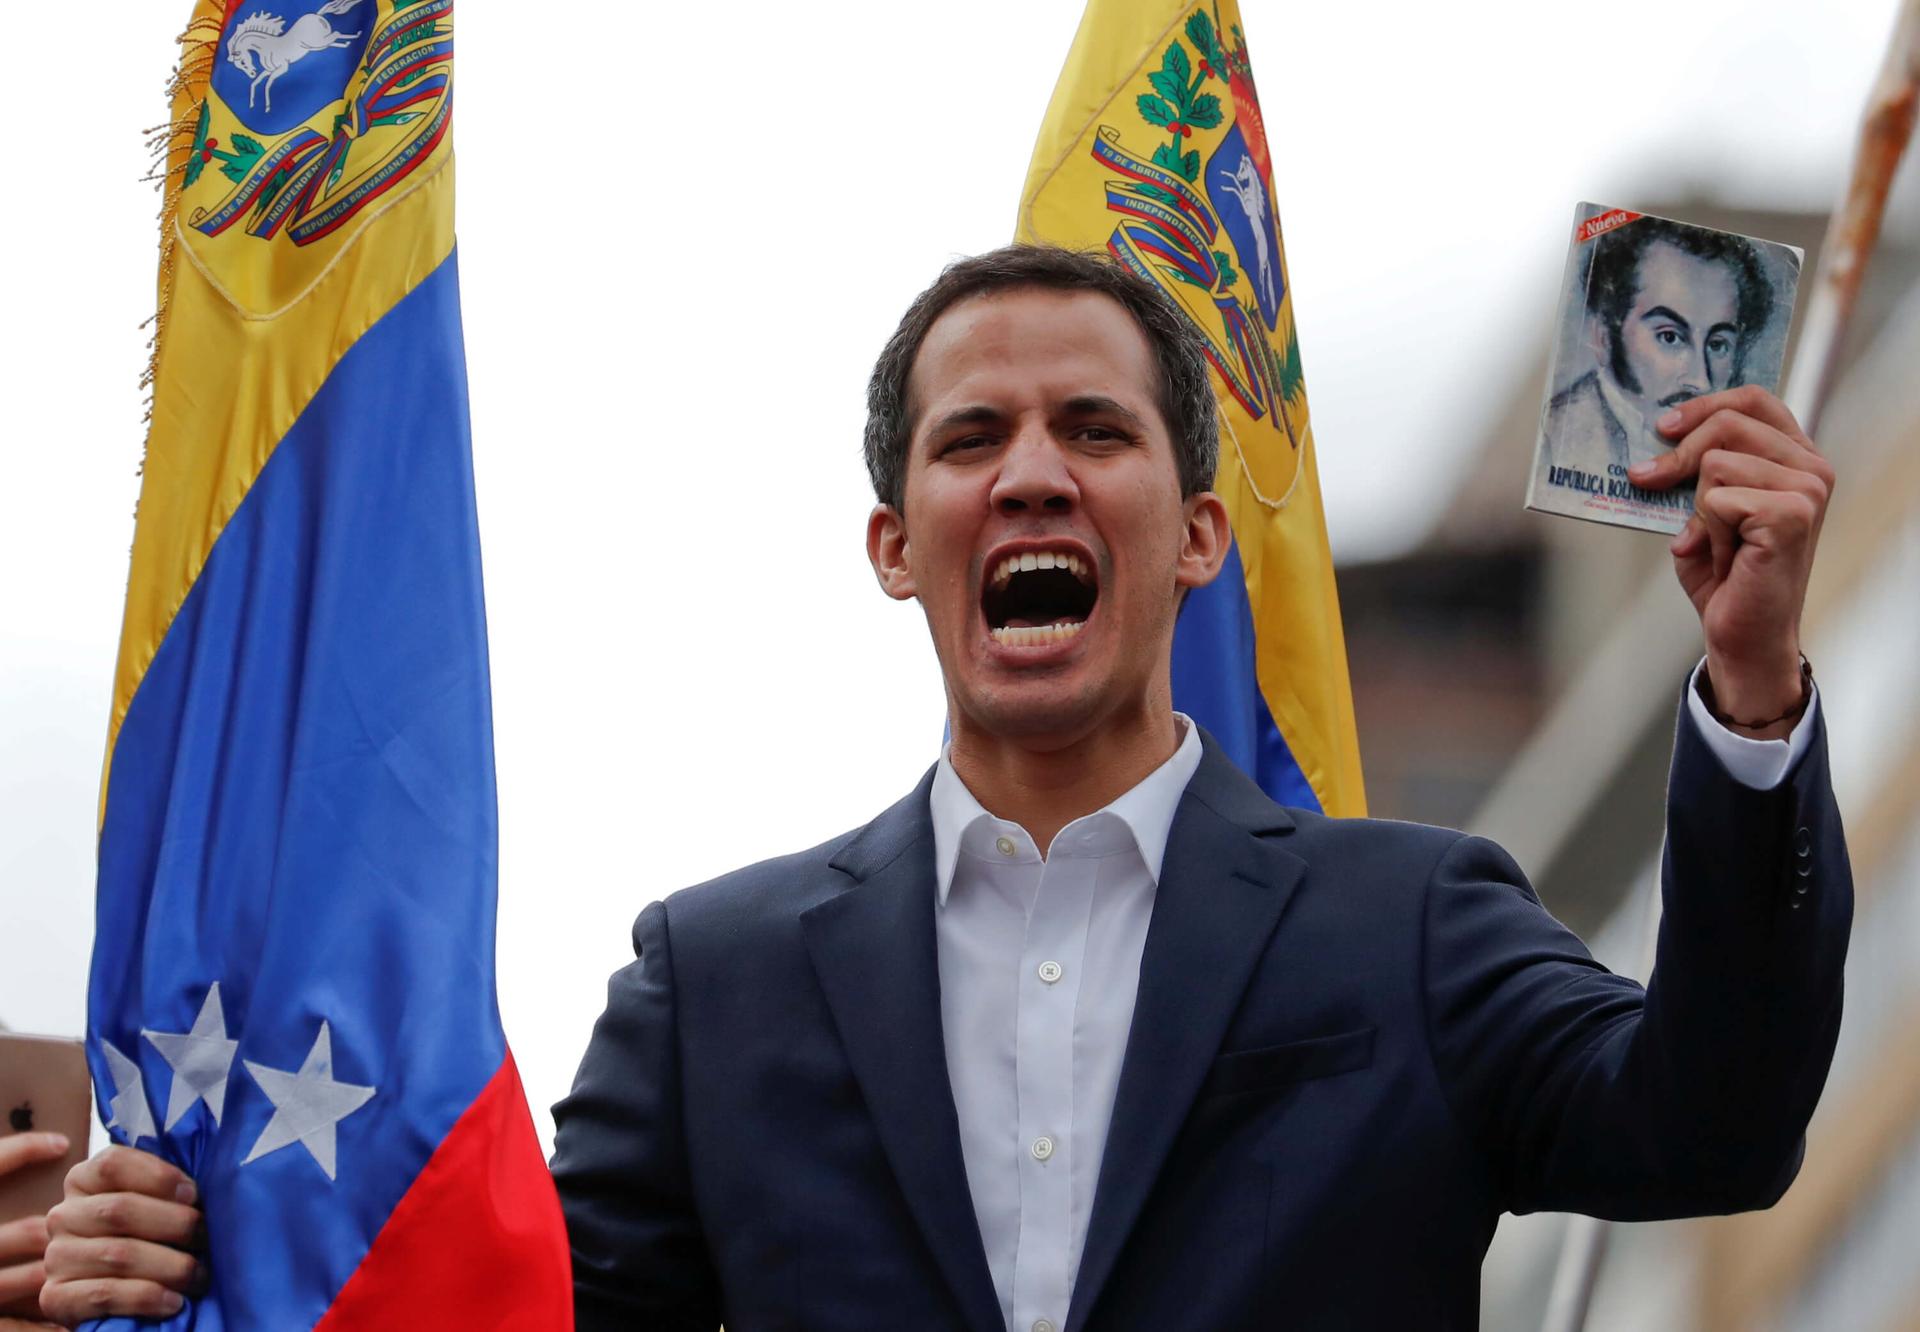 Juan Guaidó  holds a copy of Venezuelan constitution and shouts, in front of the Venezuelan flag